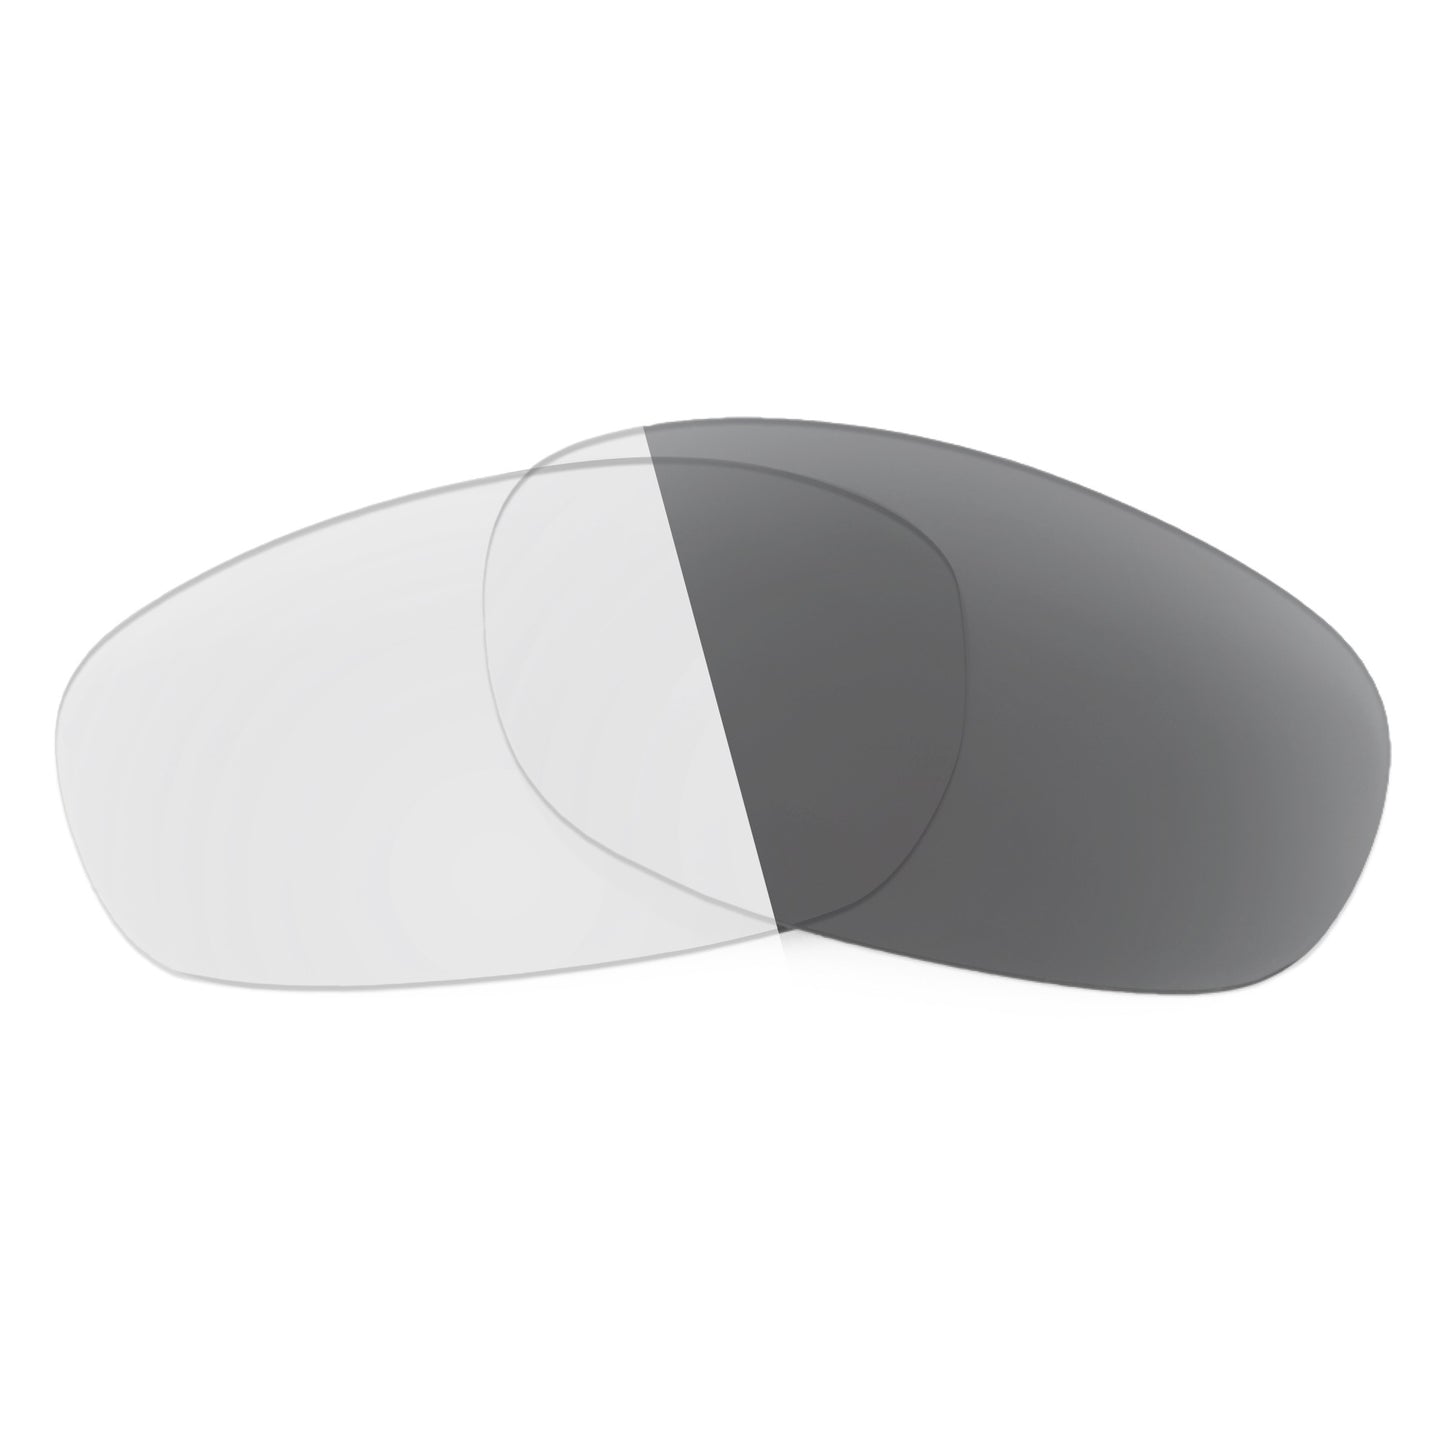 Revant replacement lenses for Wiley X Climb Non-Polarized Adapt Gray Photochromic